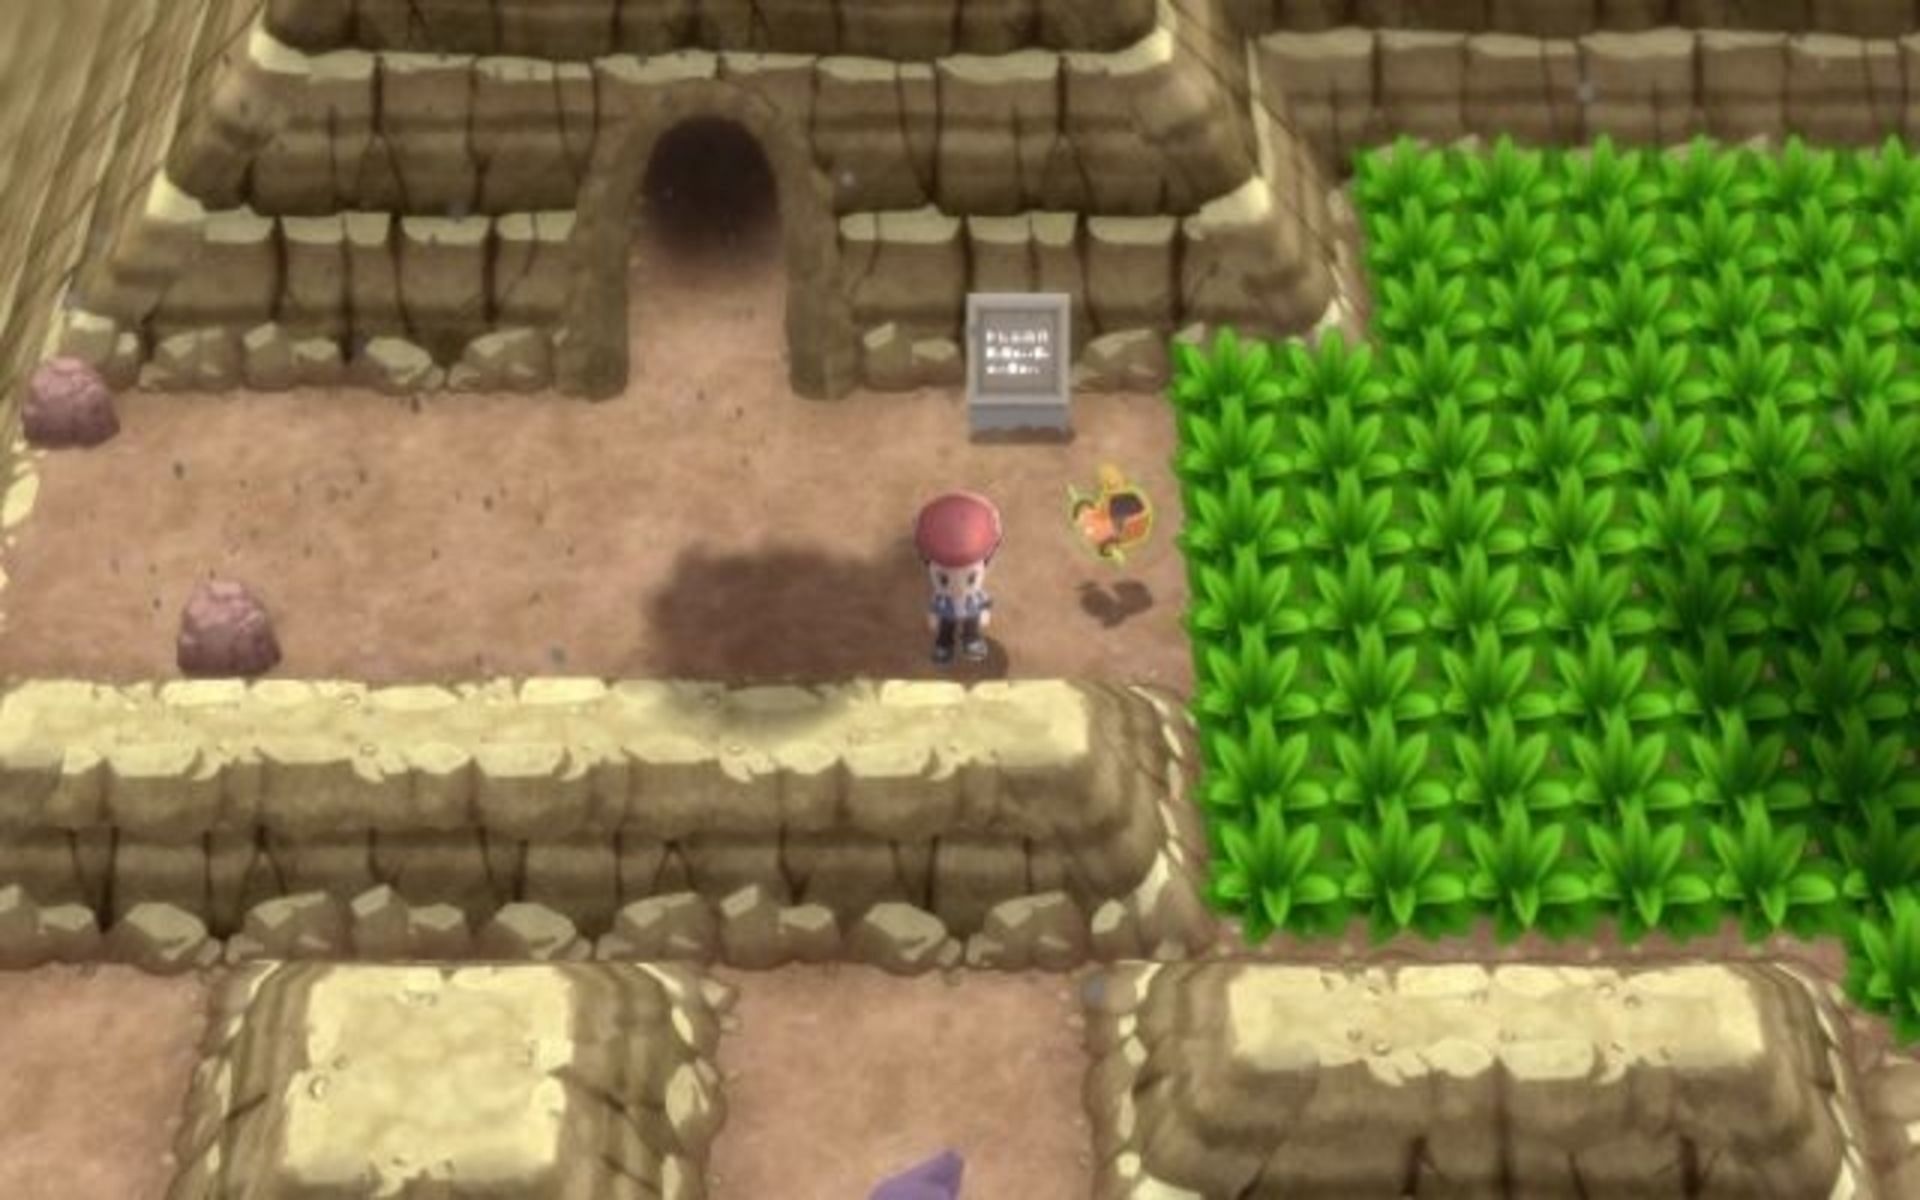 Stark Mountain is found north of Route 227 (Image via The Pokemon Company)